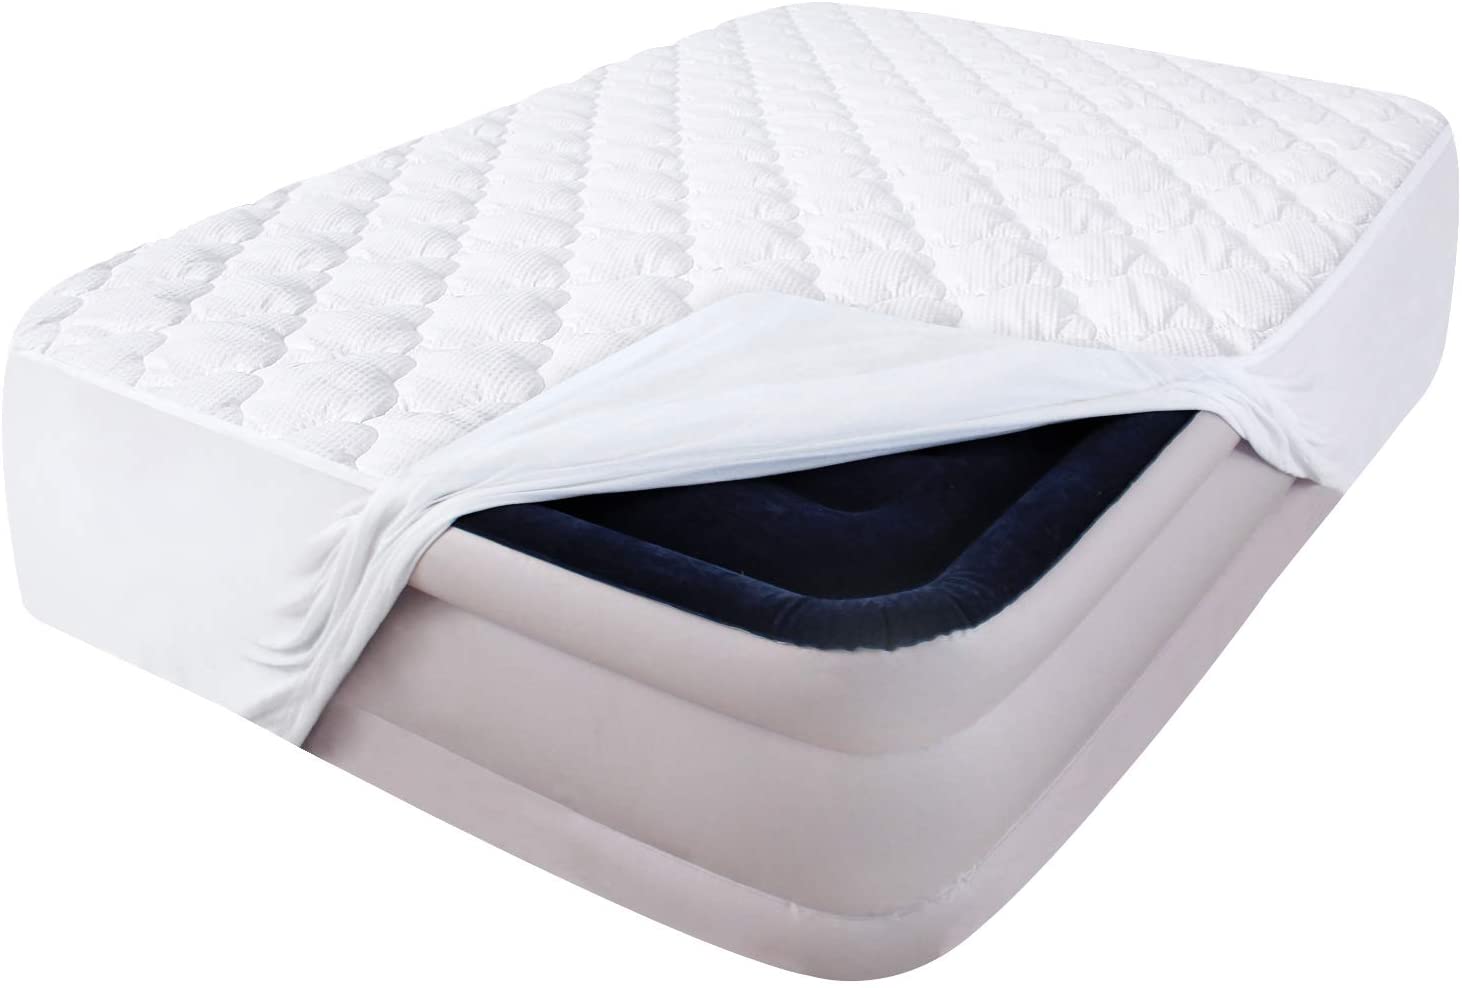 Use a mattress topper to make an air bed more comfortable